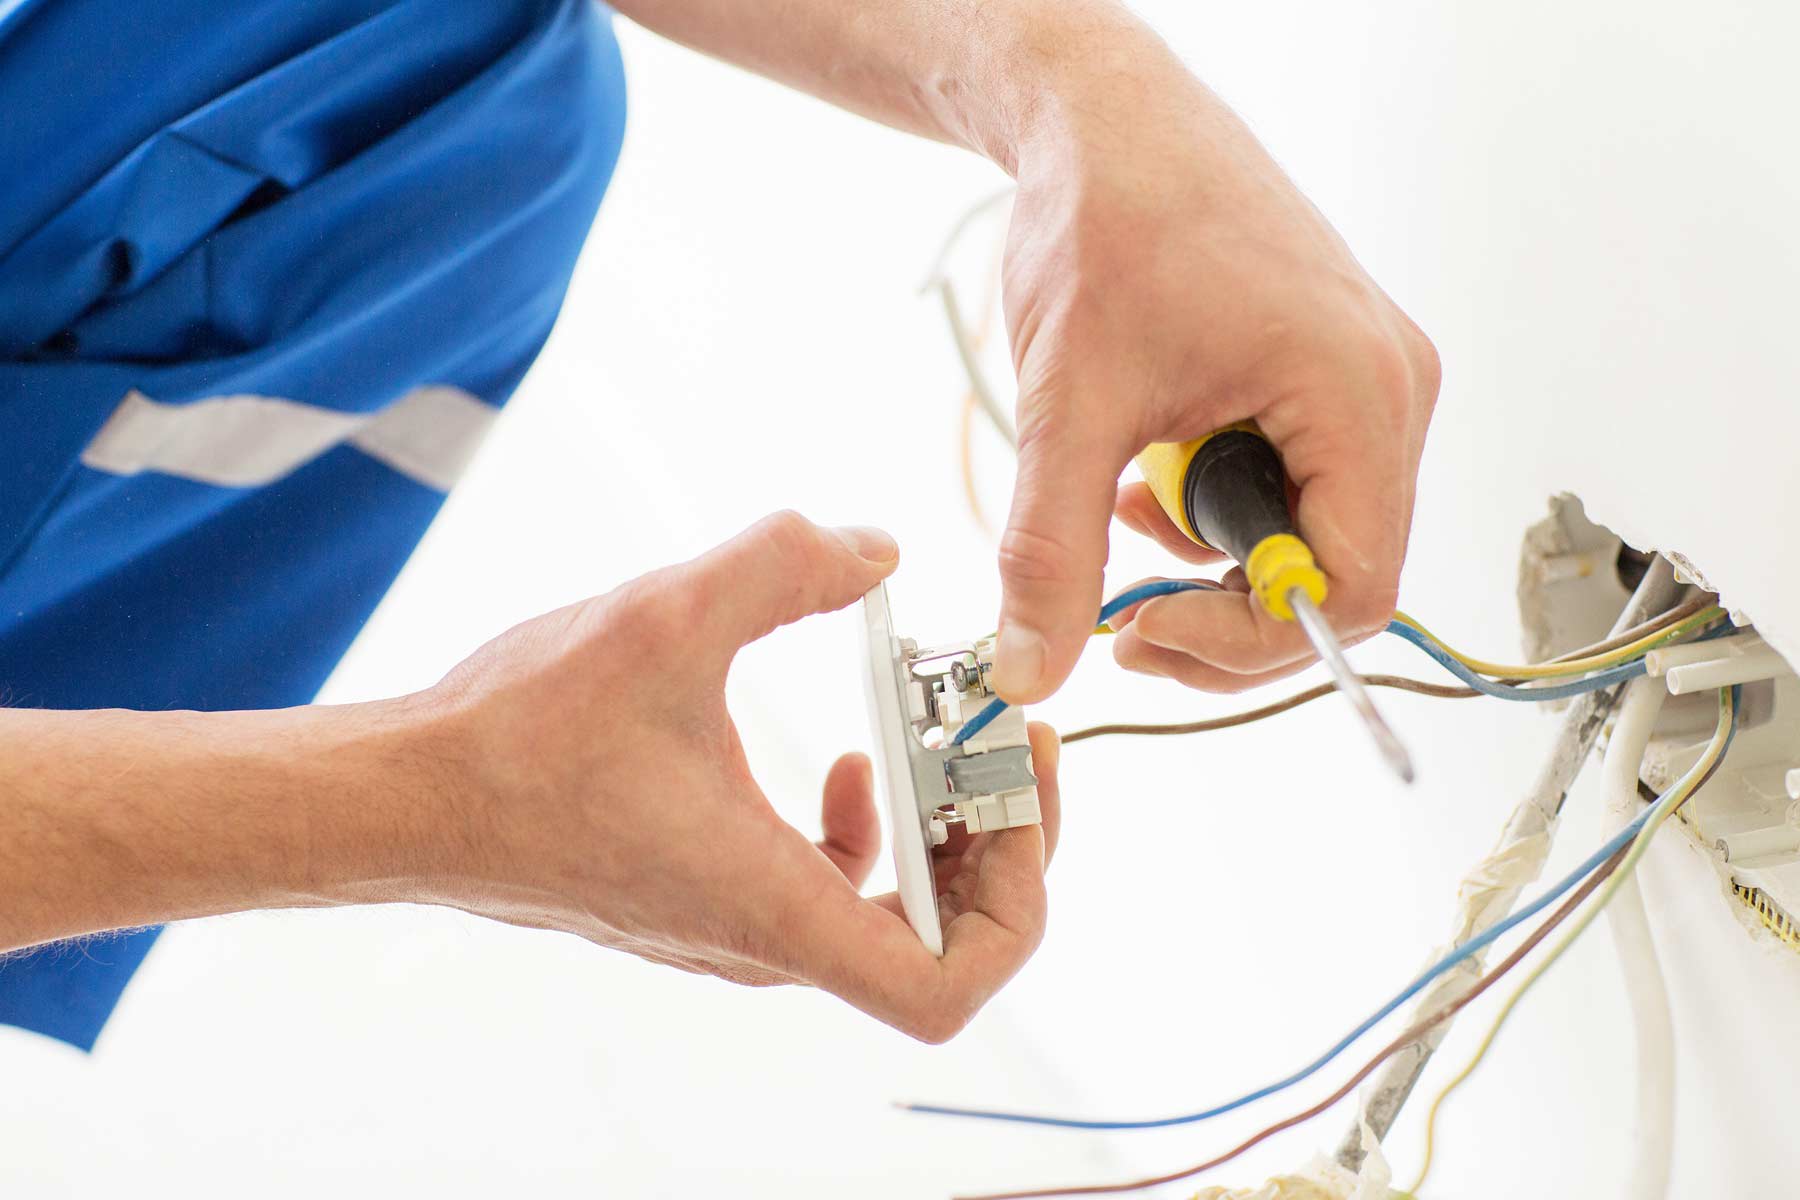 Find a electrical outlet installer near you